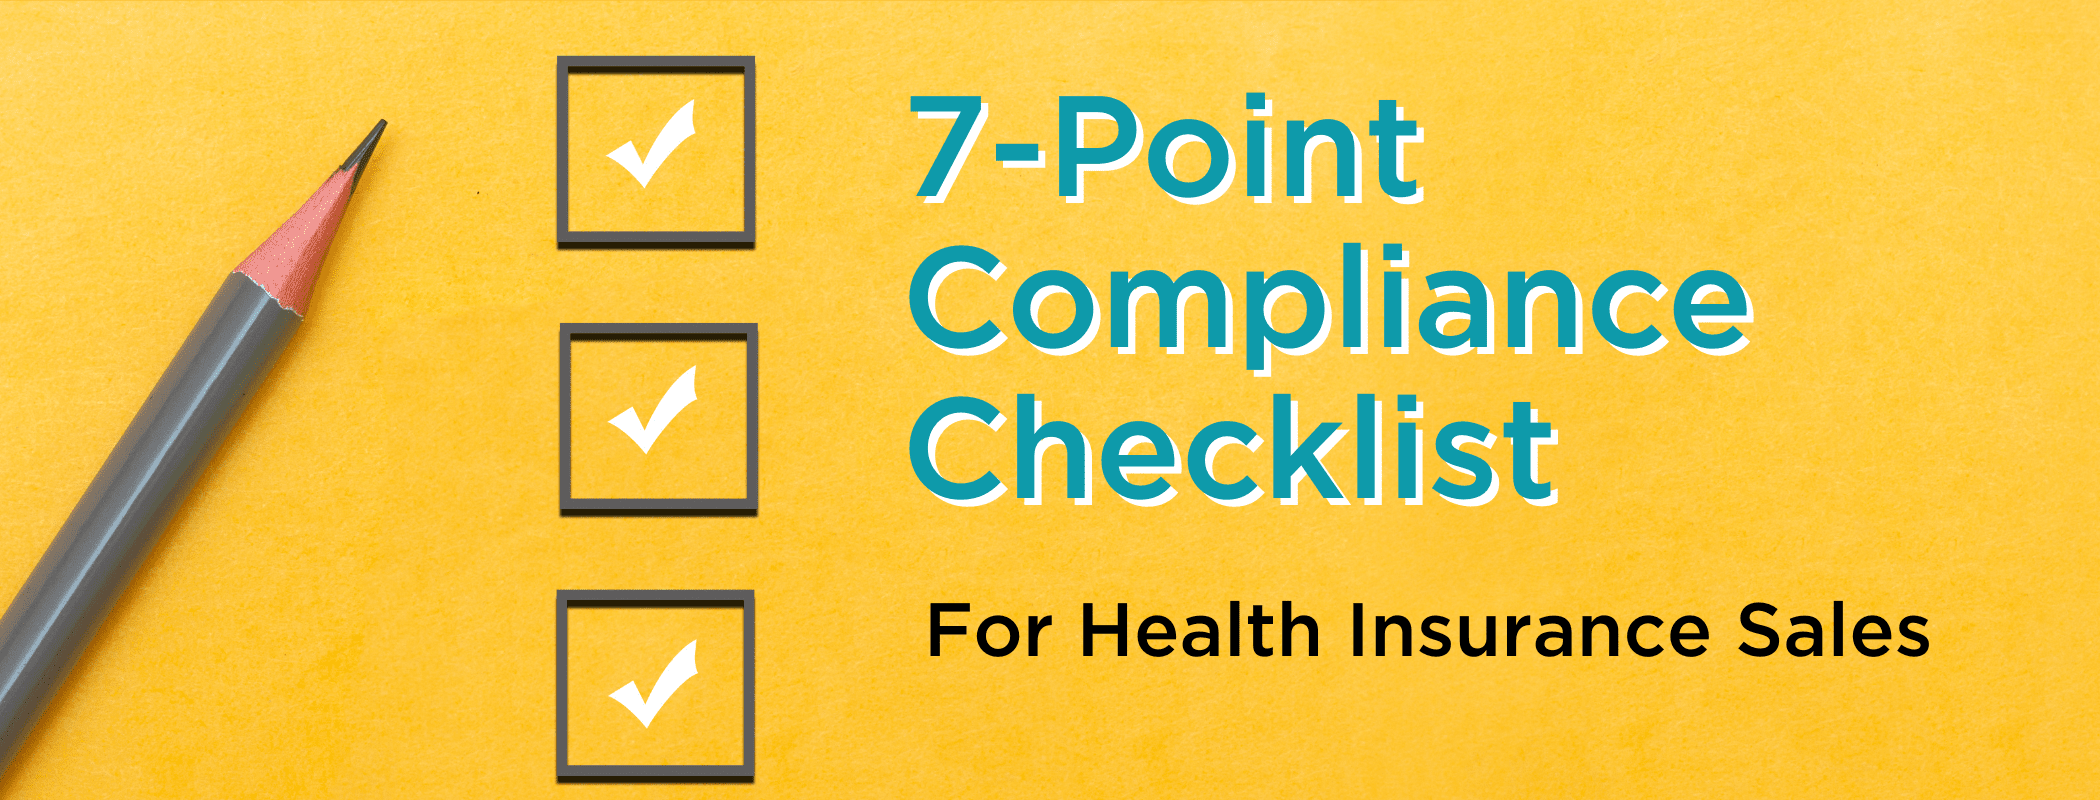 7-Point Compliance Checklist for Health Insurance Sales